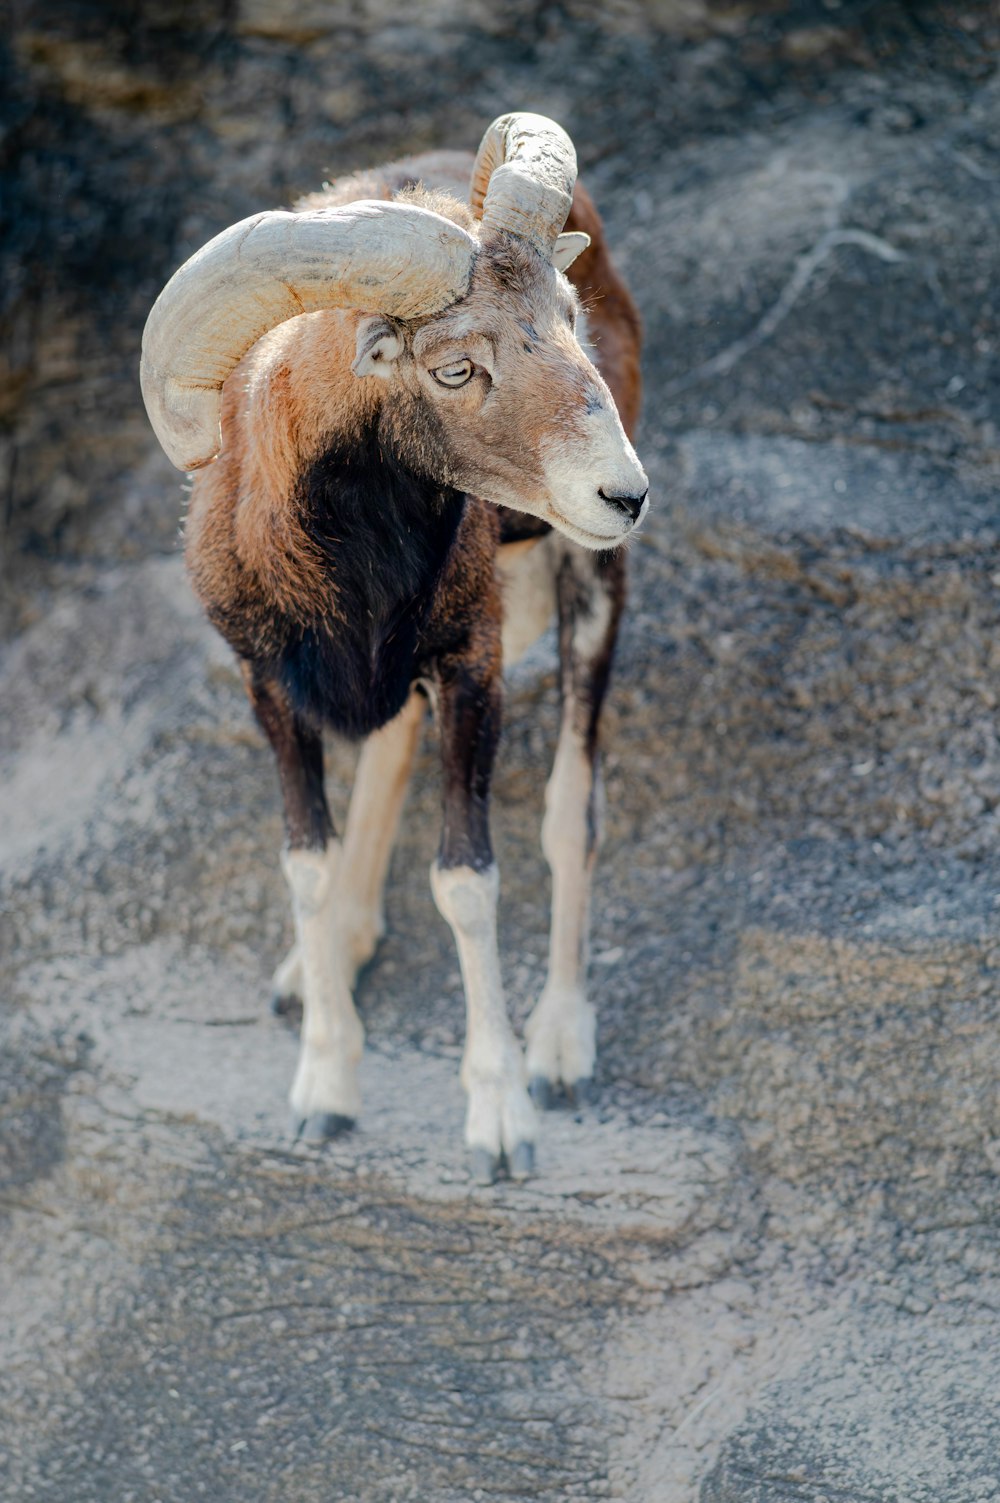 a ram with large horns standing in a rocky area